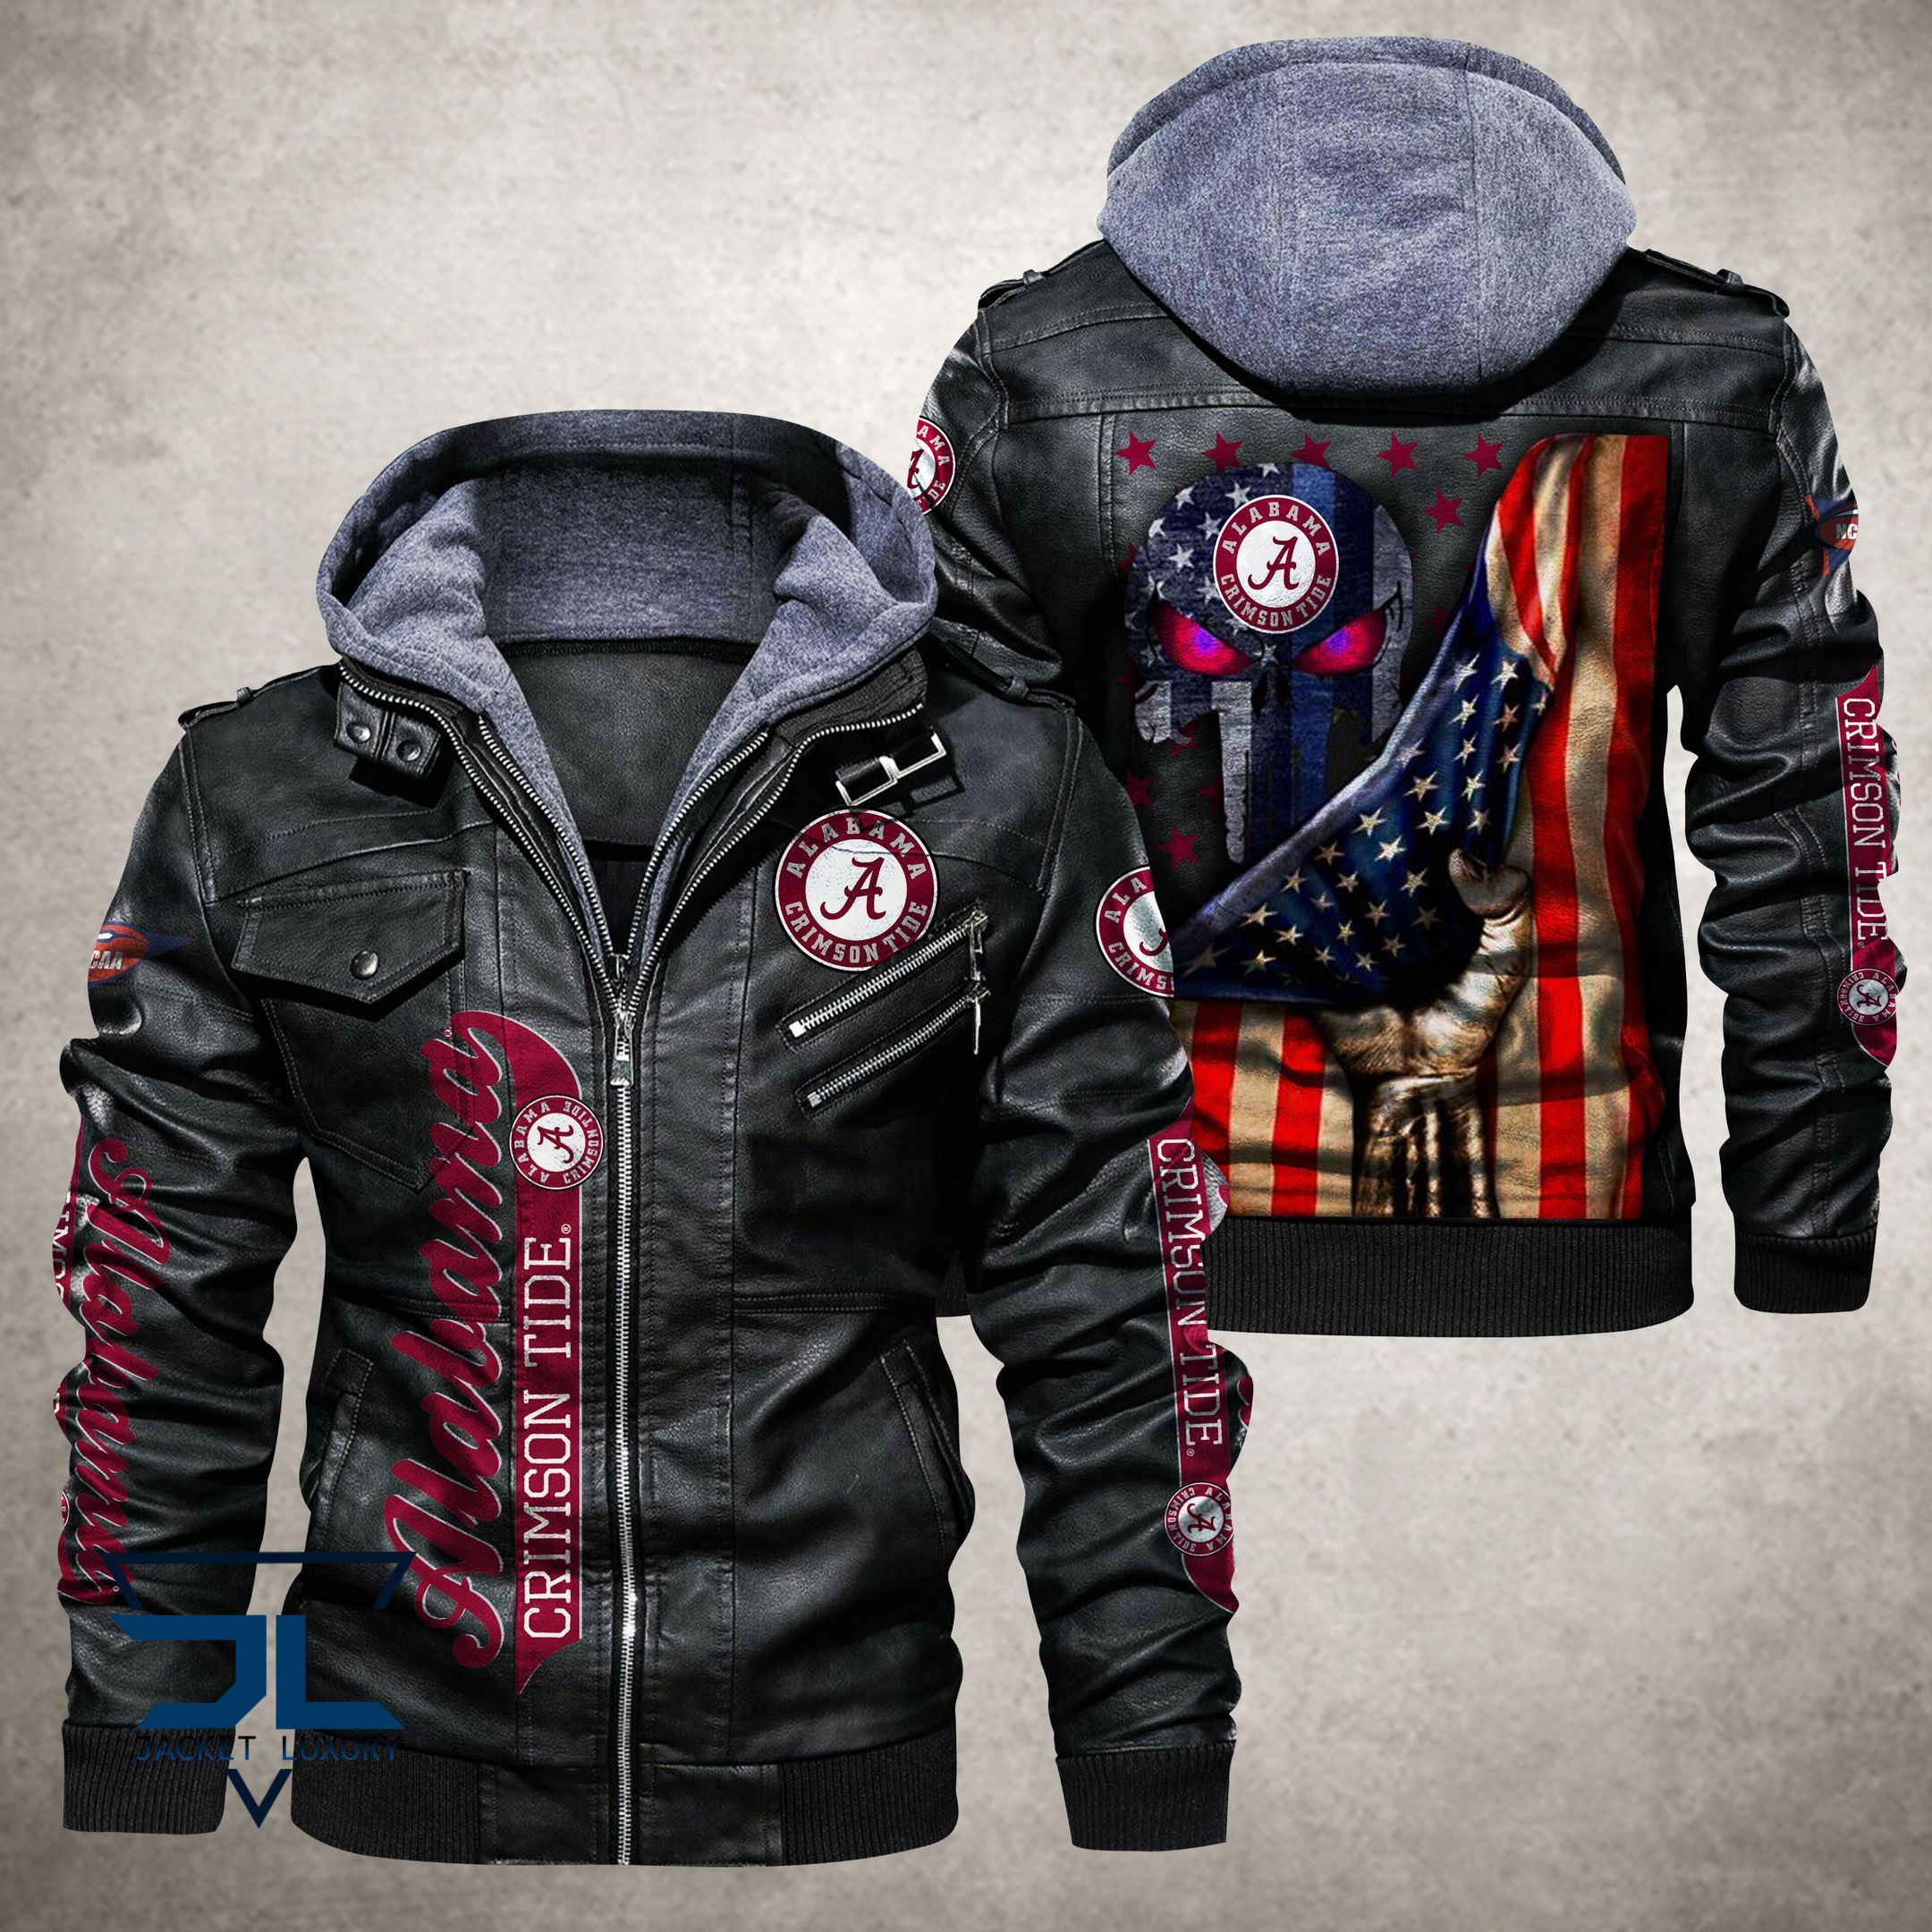 The most popular jacket on Tezostore 121